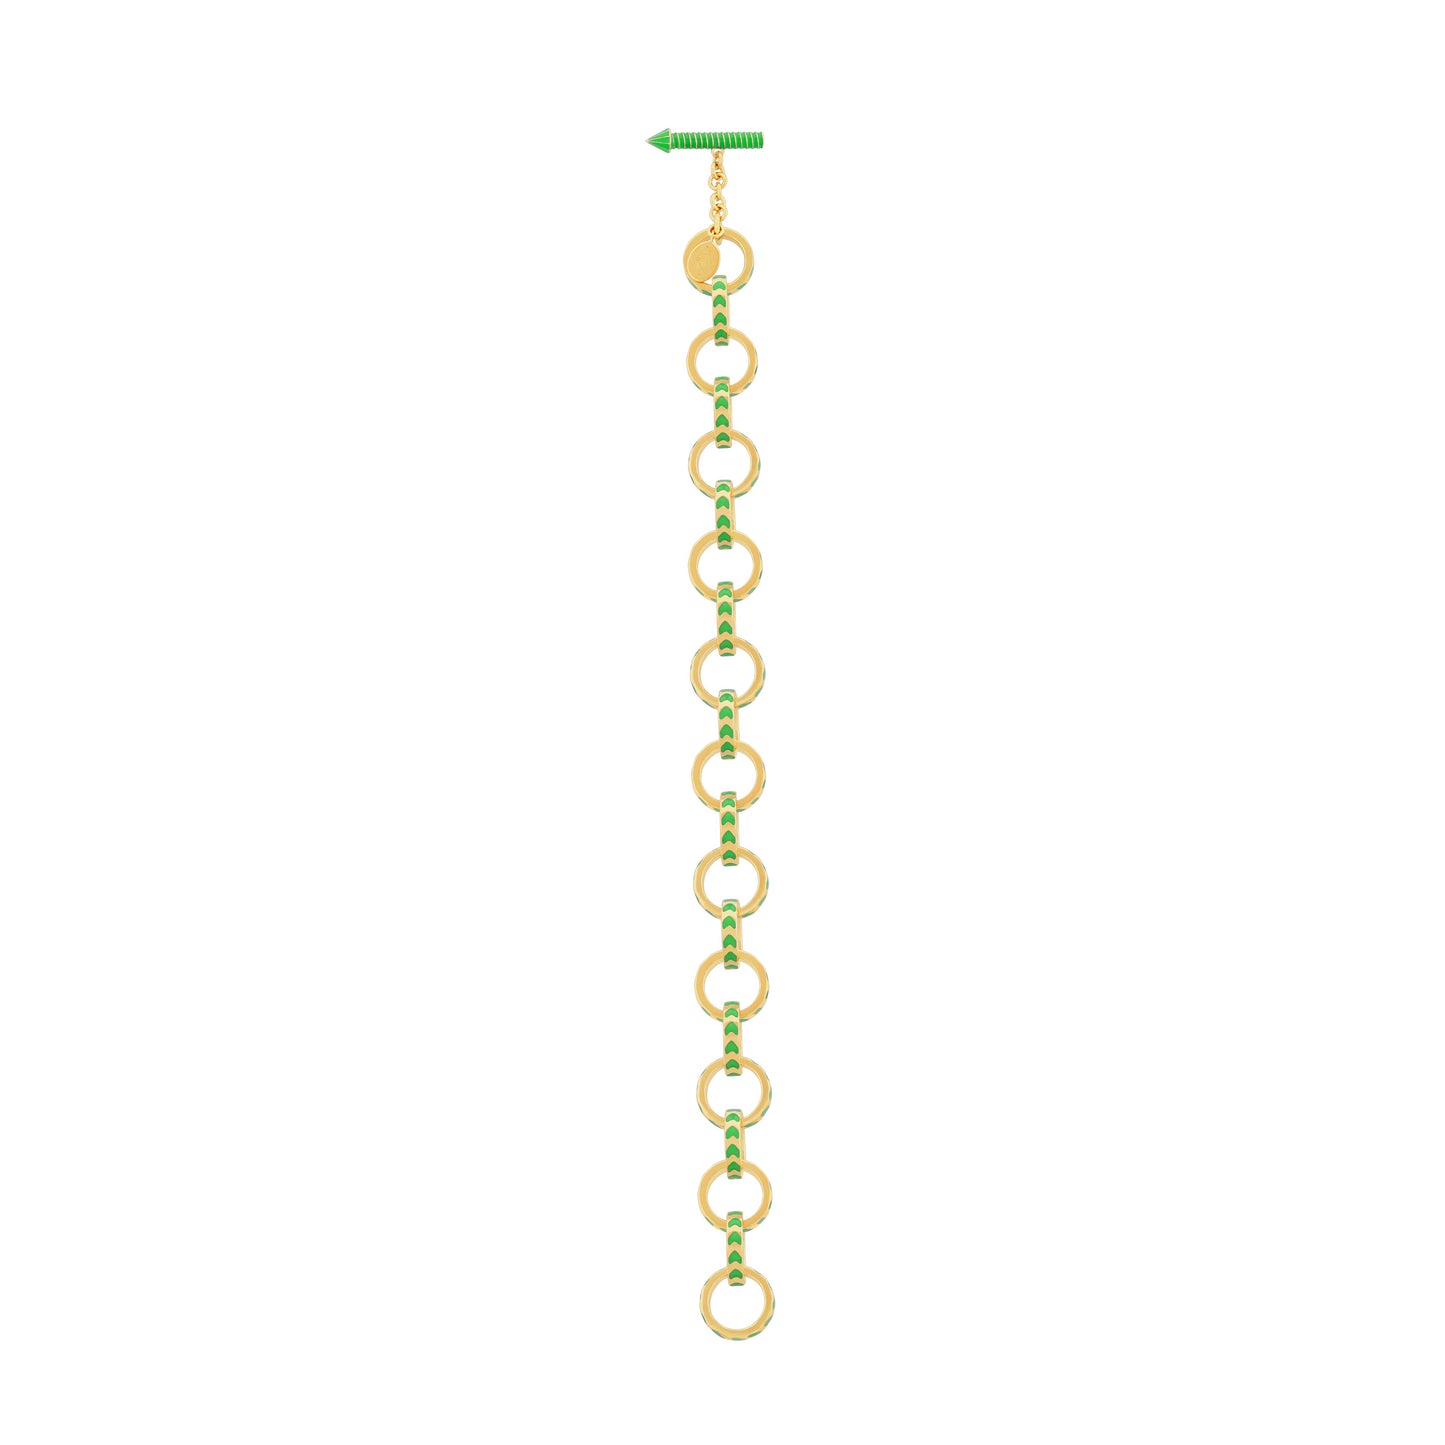 image of spark gold chain bracelet in green and gold in a straight line flat on a white background